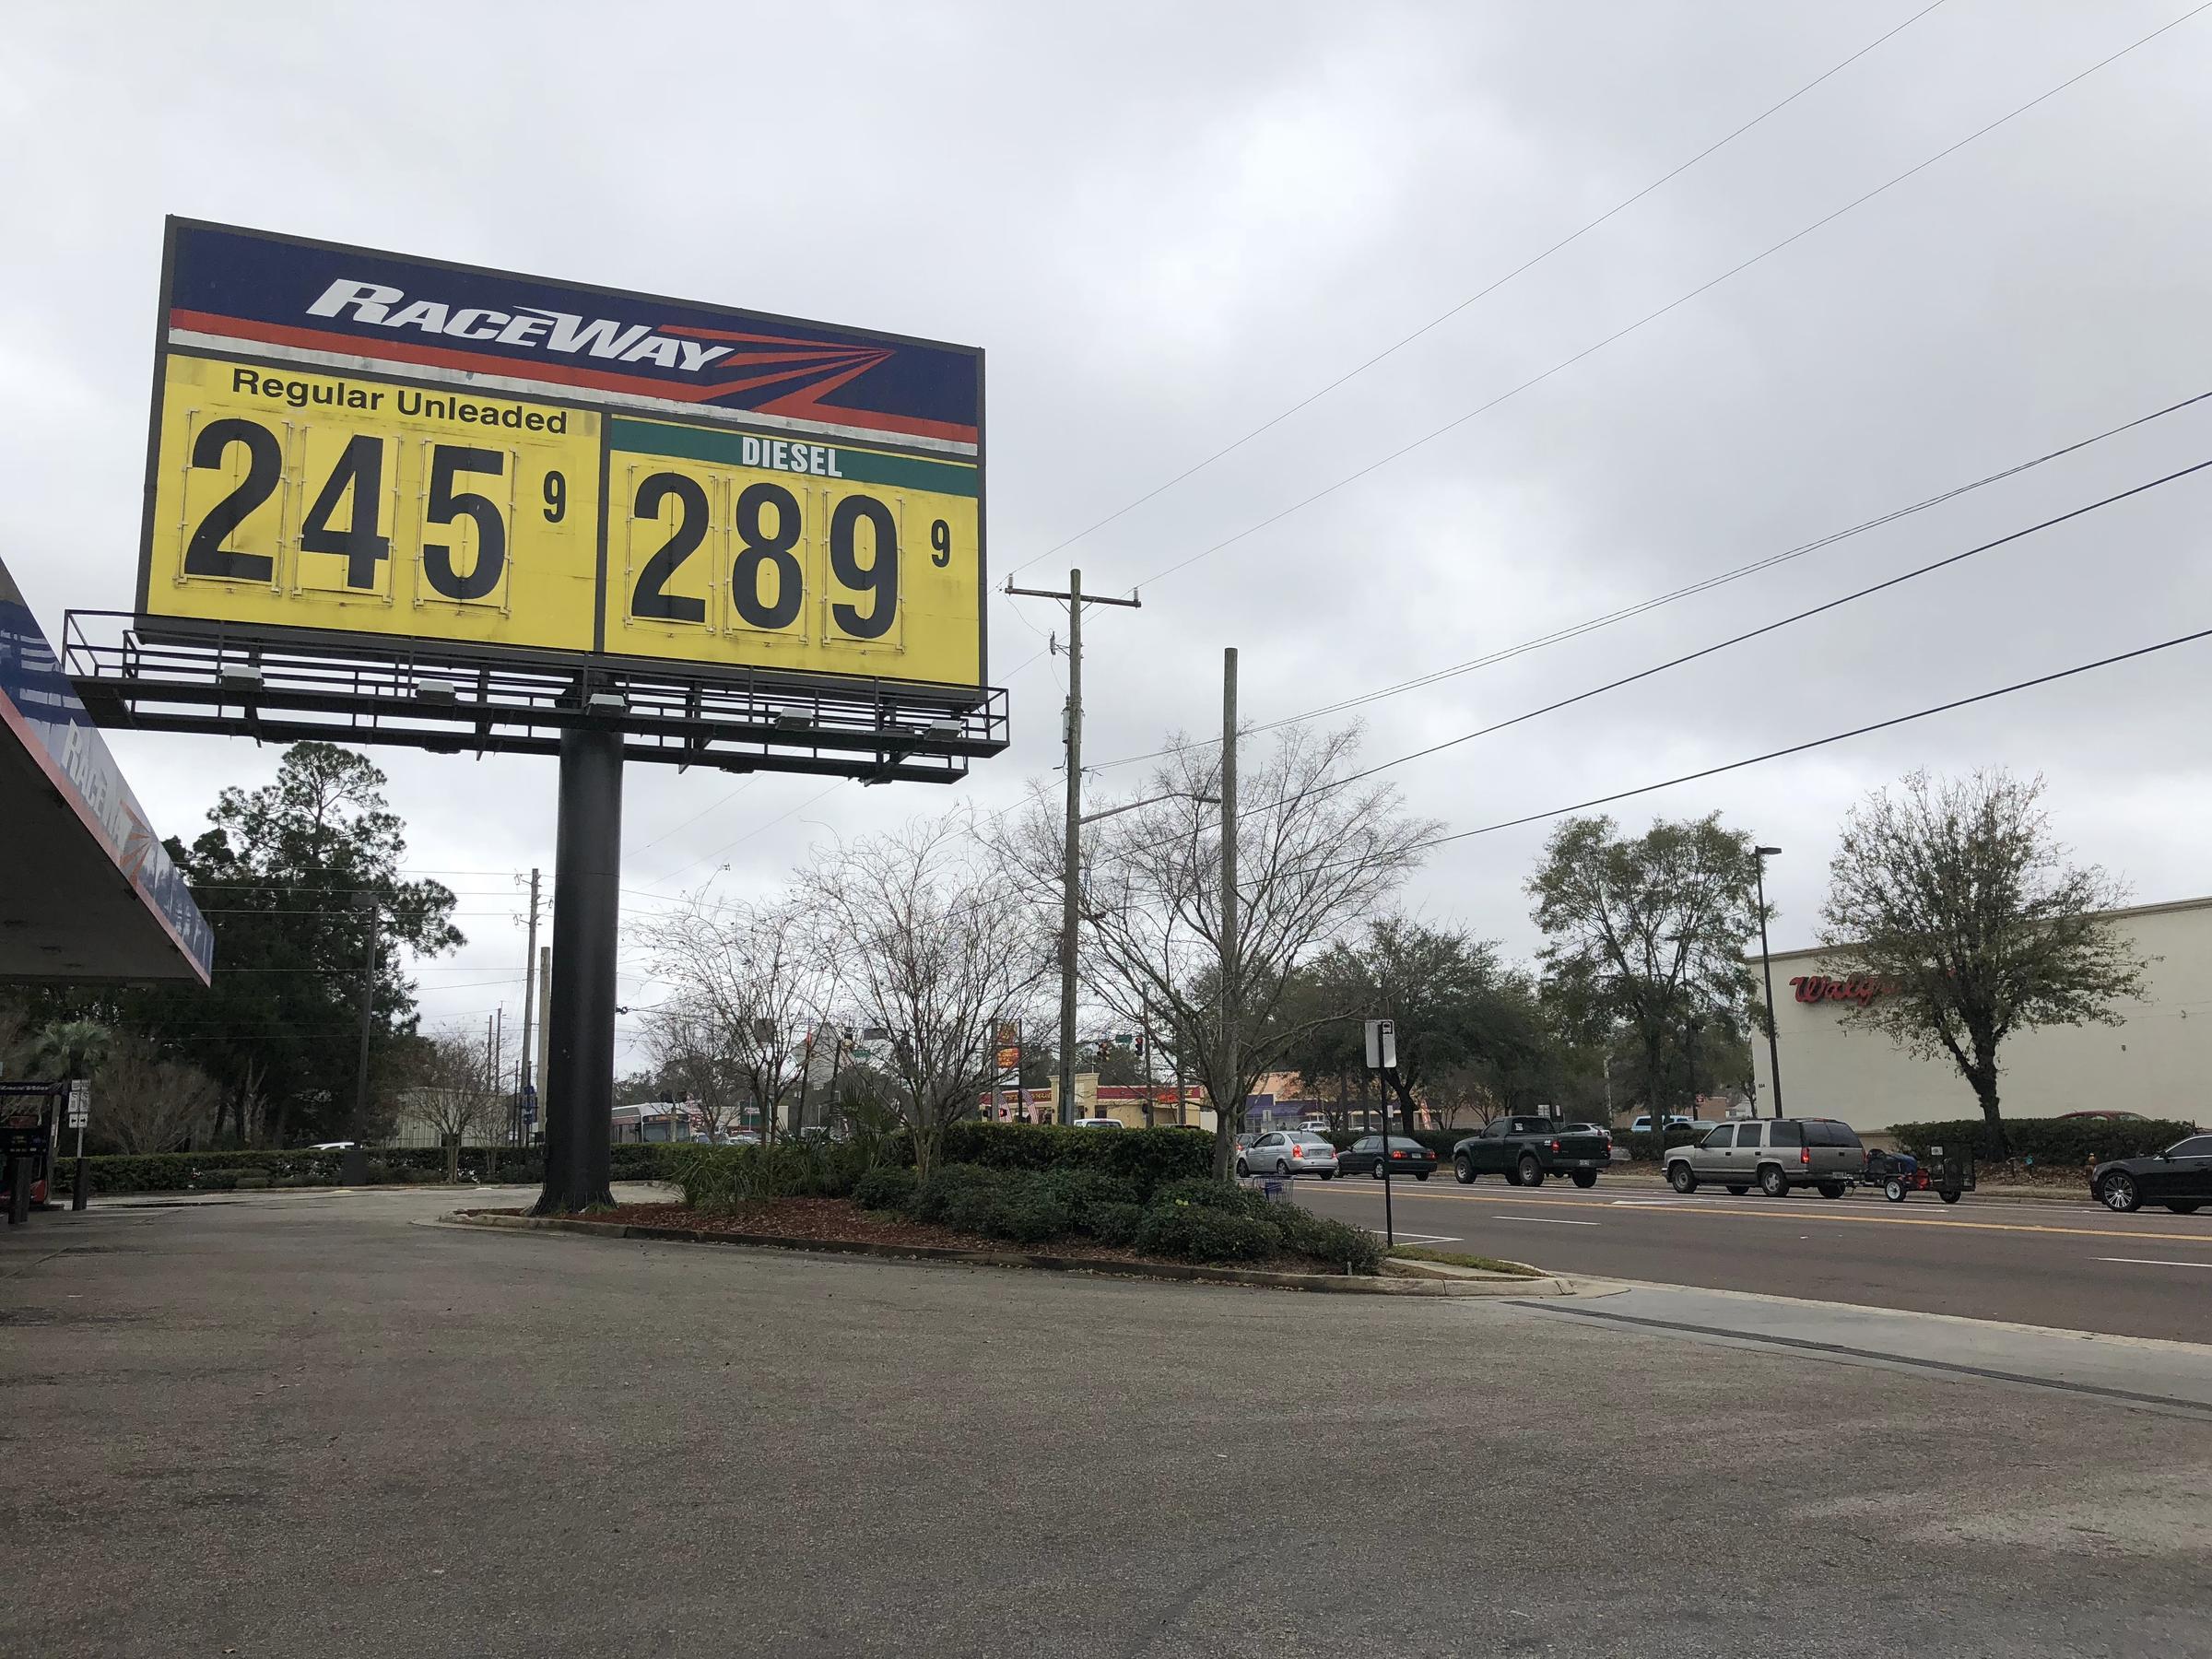 Raceway Gas Station Logo - March 1 Deadline Nears For Big Gas Station Signs To Come Down | WJCT ...